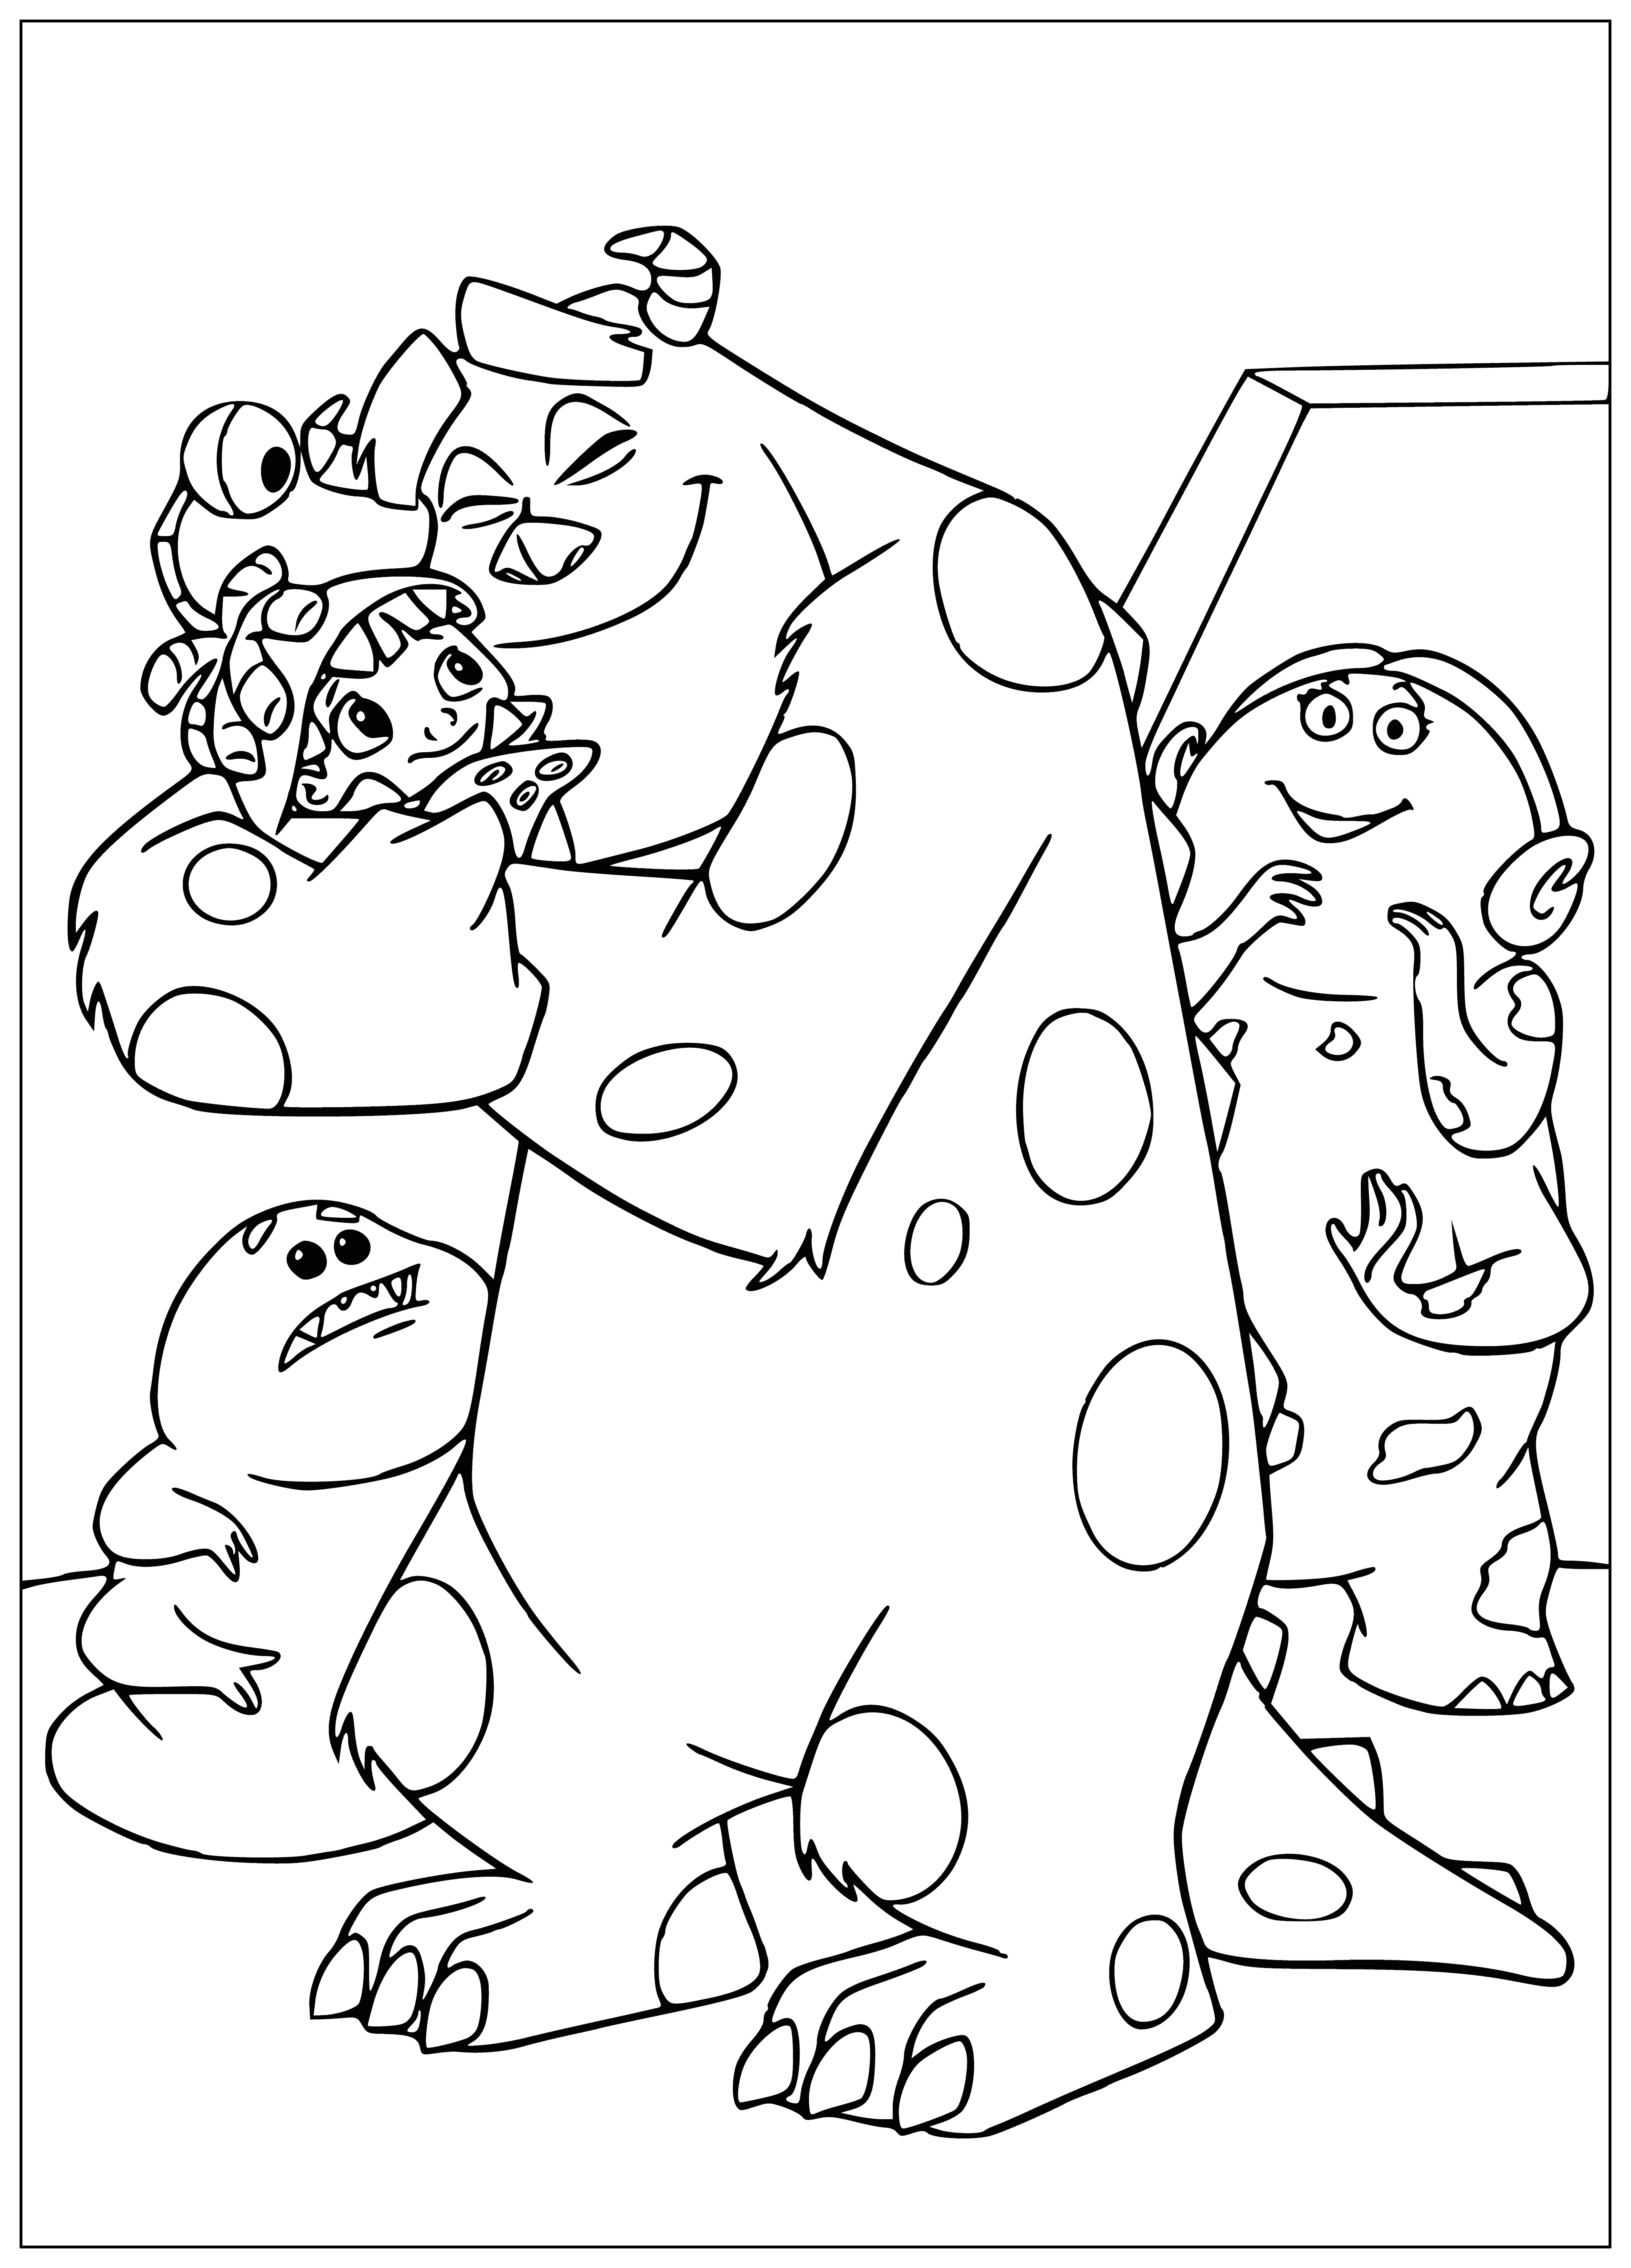 coloring page: Group of monsters gathered around, looking excited at a drawing with the word "FOUND!" written below it. #MonsterInc #ColoringPage